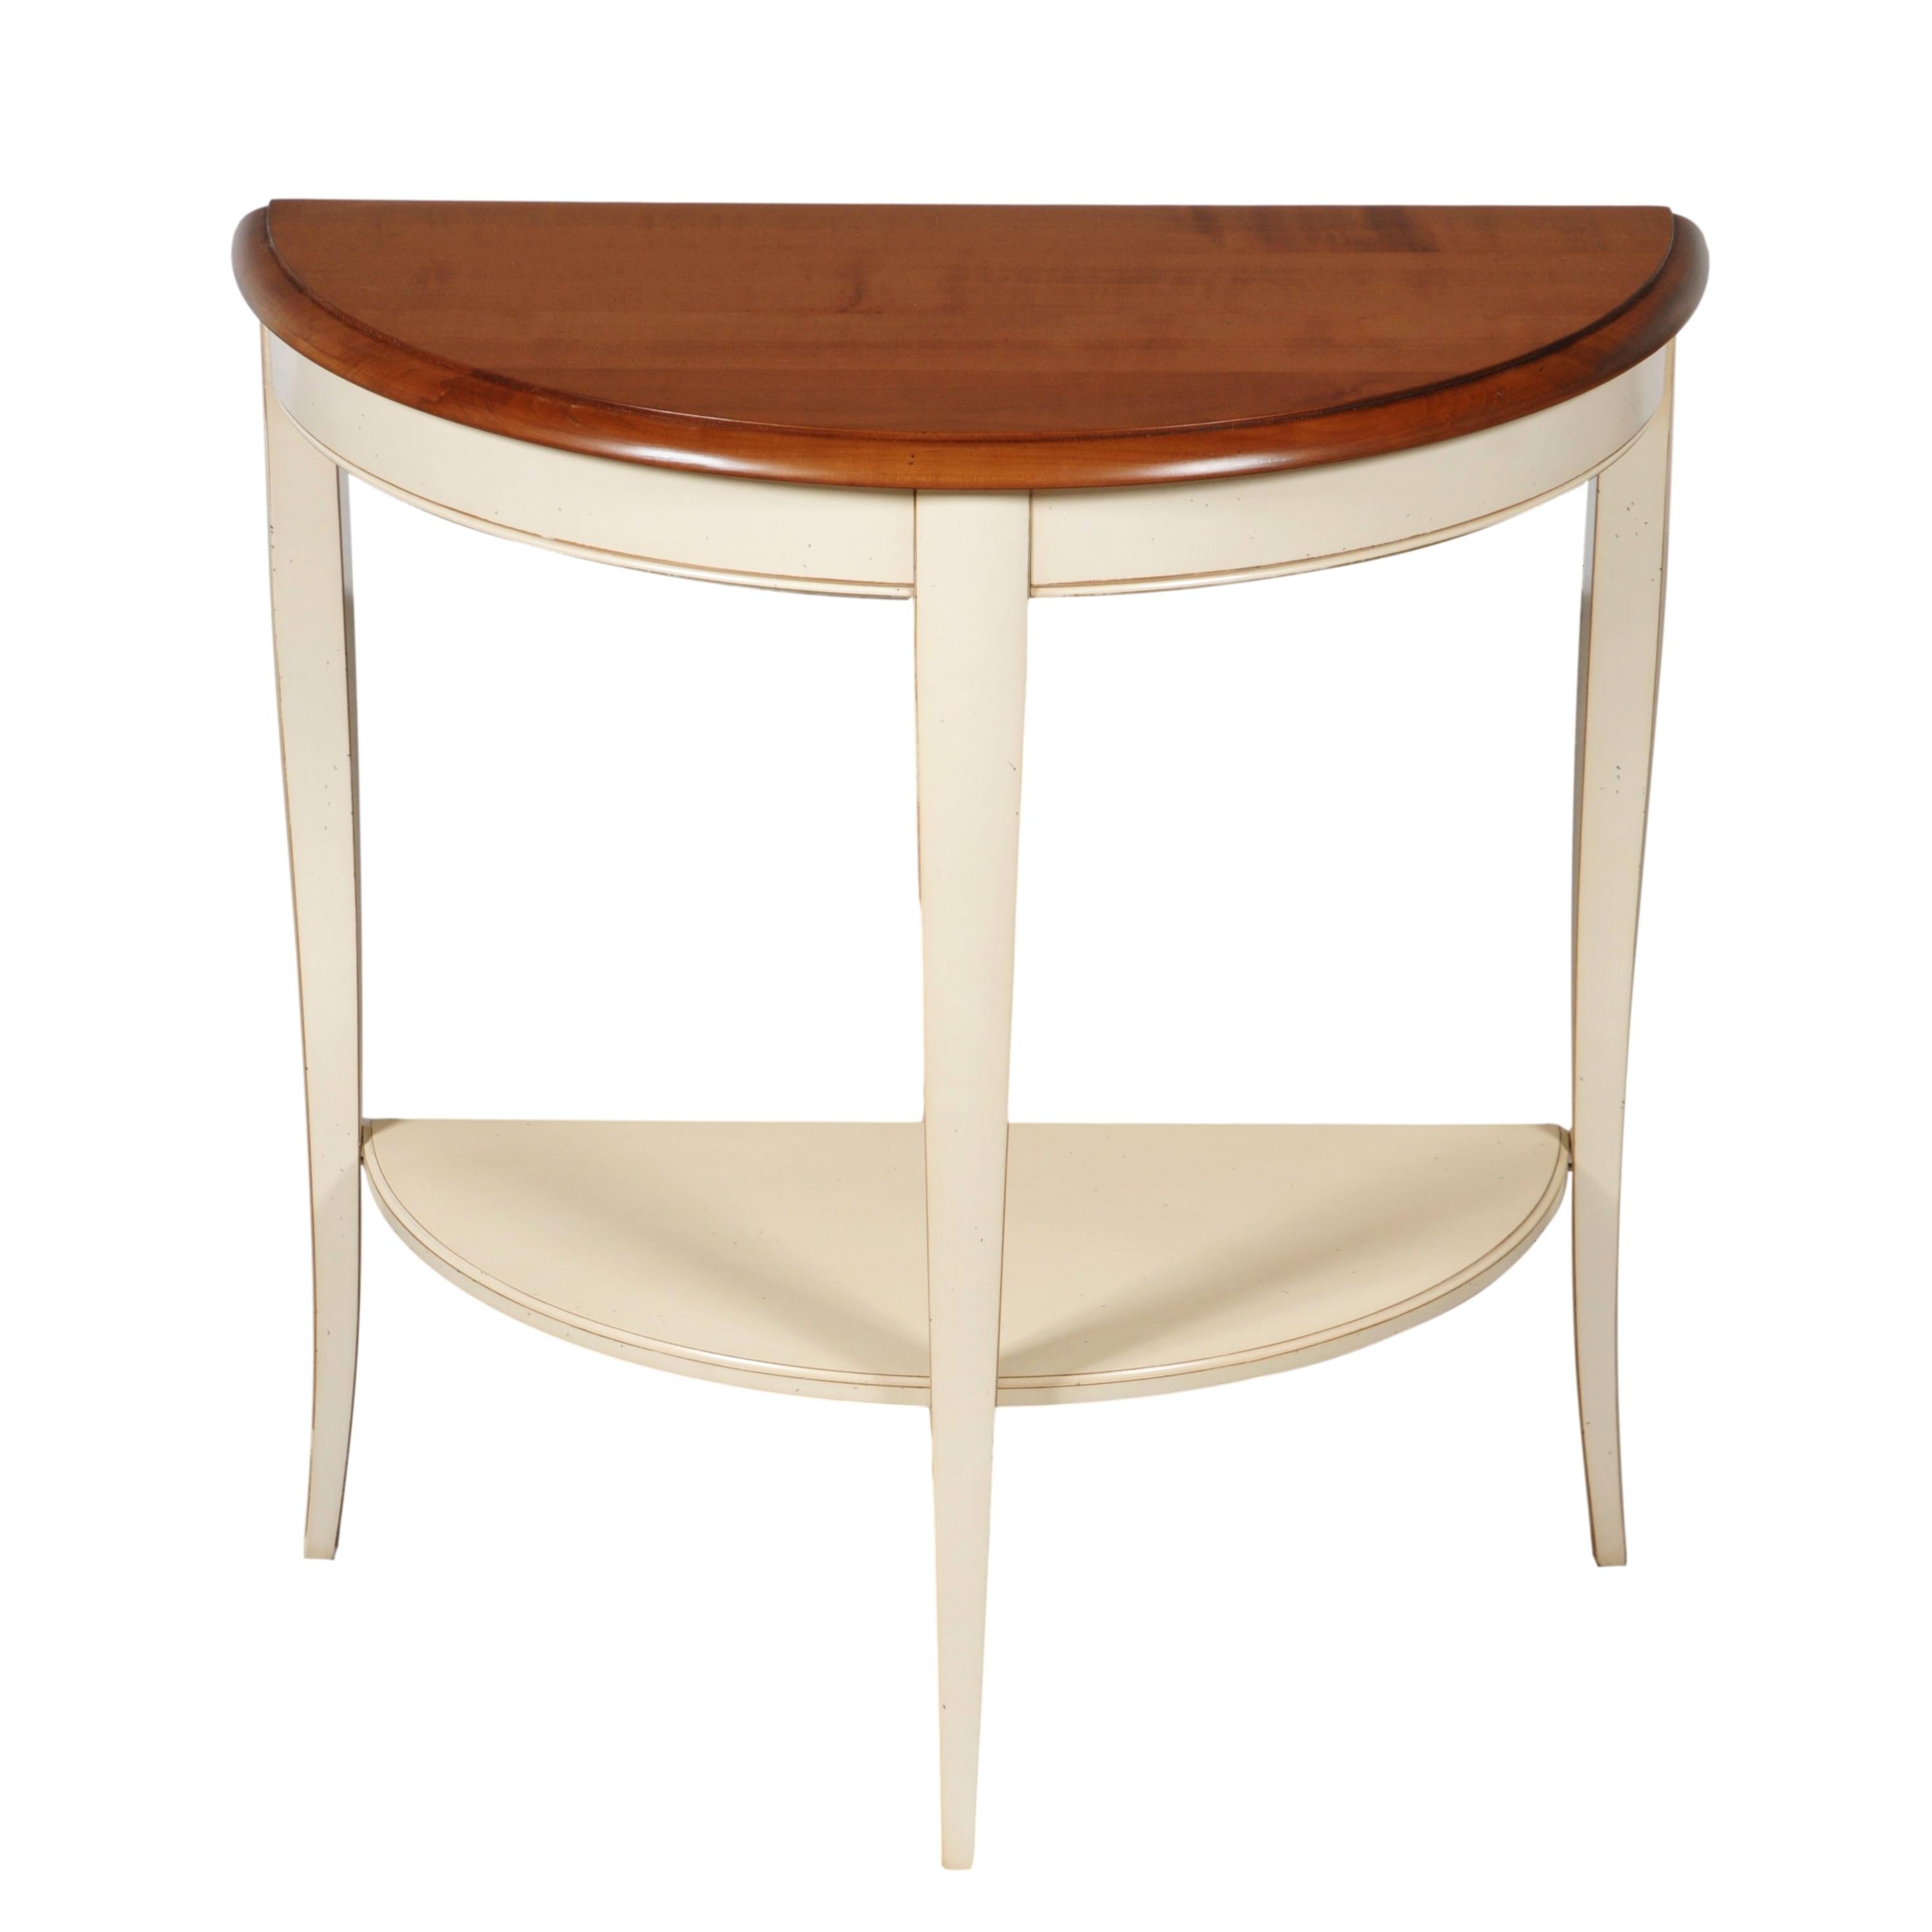 Half Moon Cherry Console, Betweenleg Shelf, White-Cream Lacquered, Stained Top